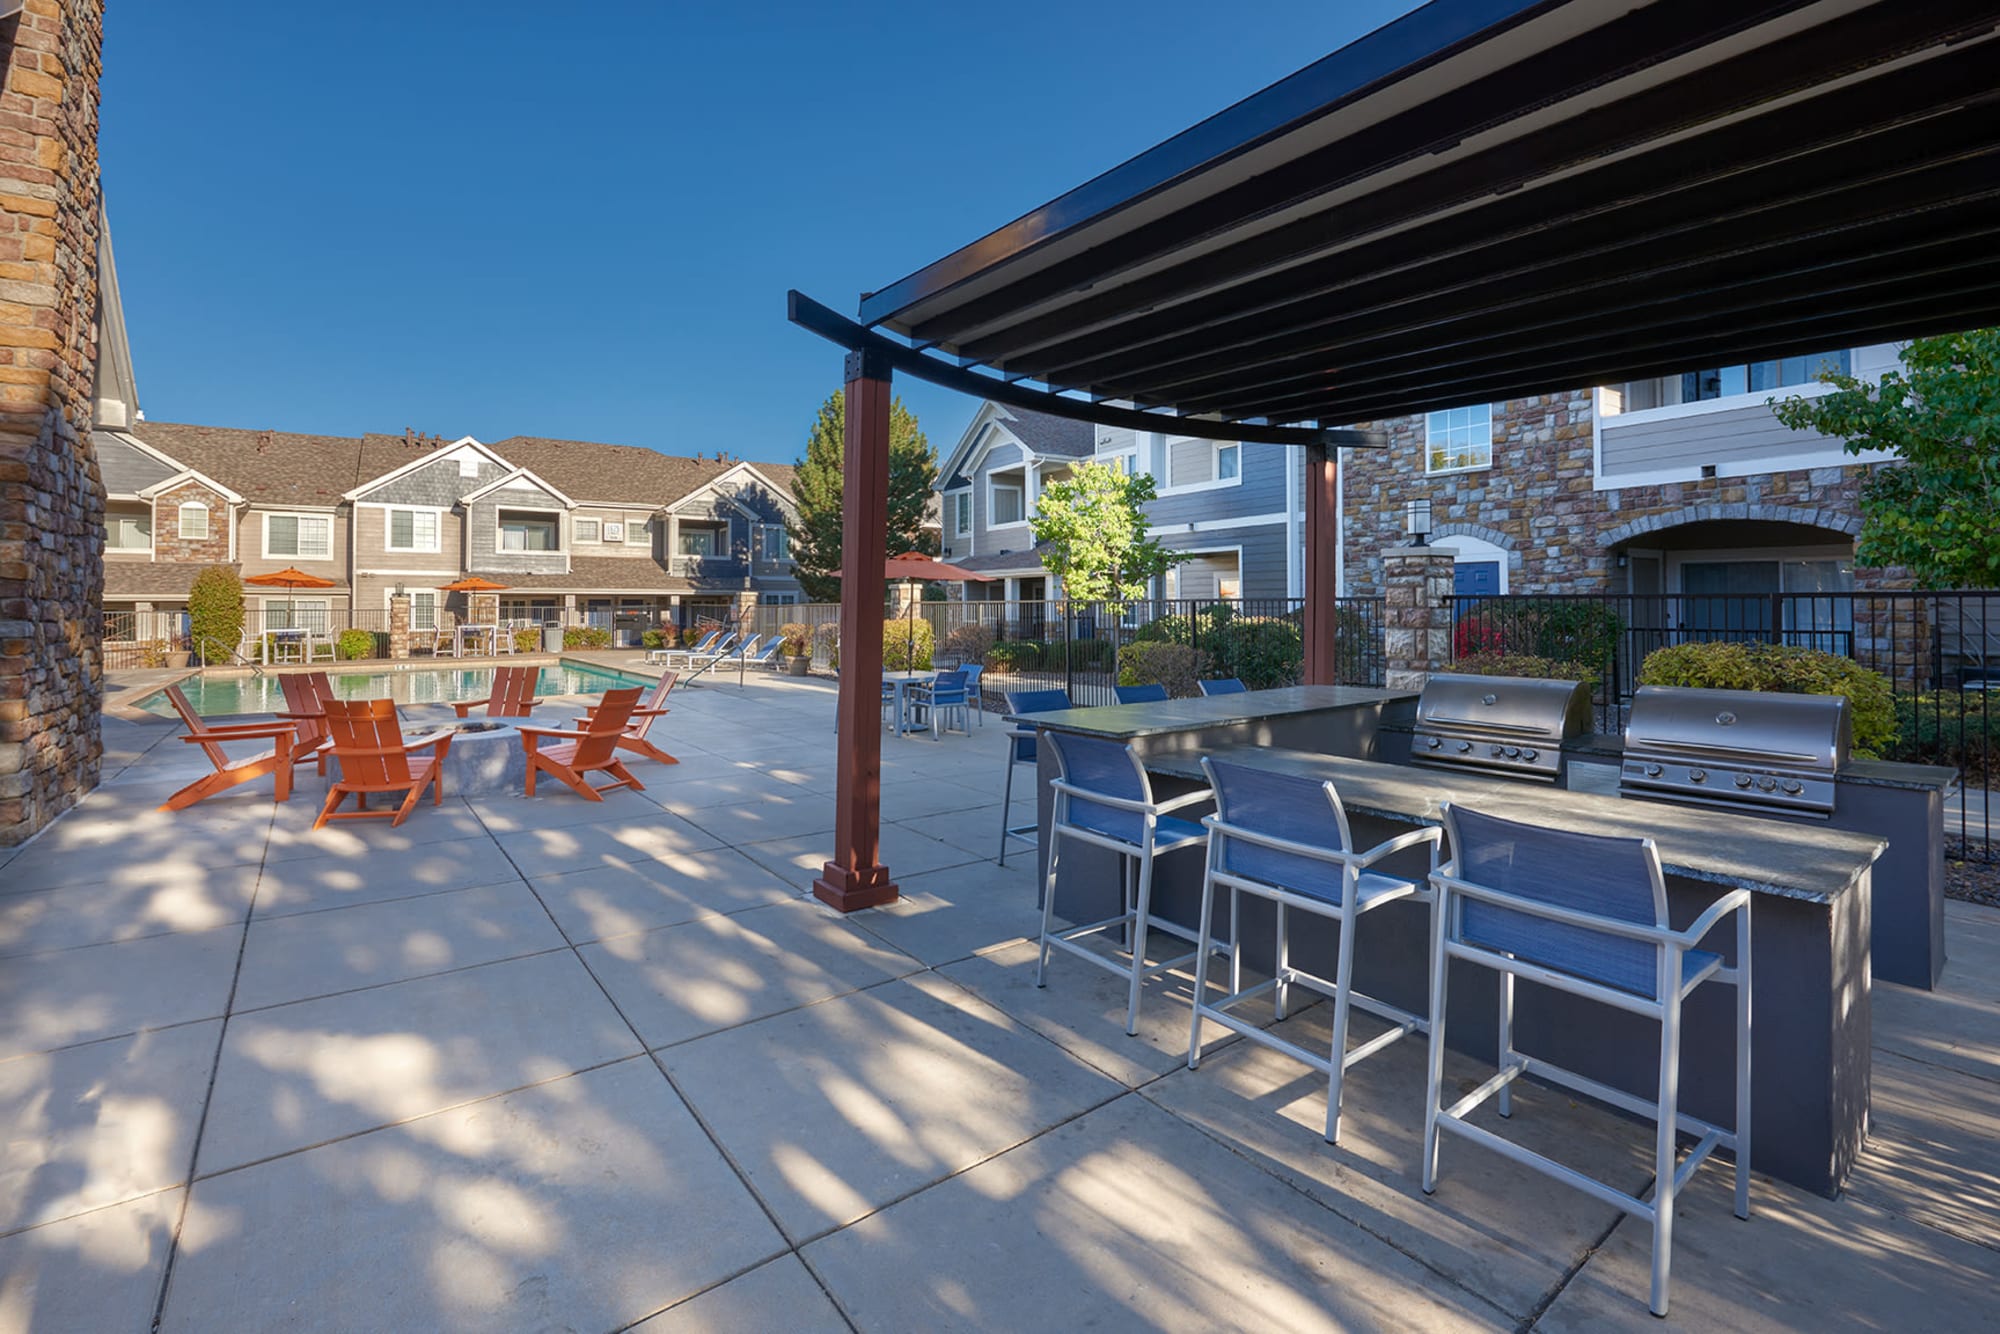 Fire Pit and Covered BBQ at Crestone Apartments in Aurora, Colorado